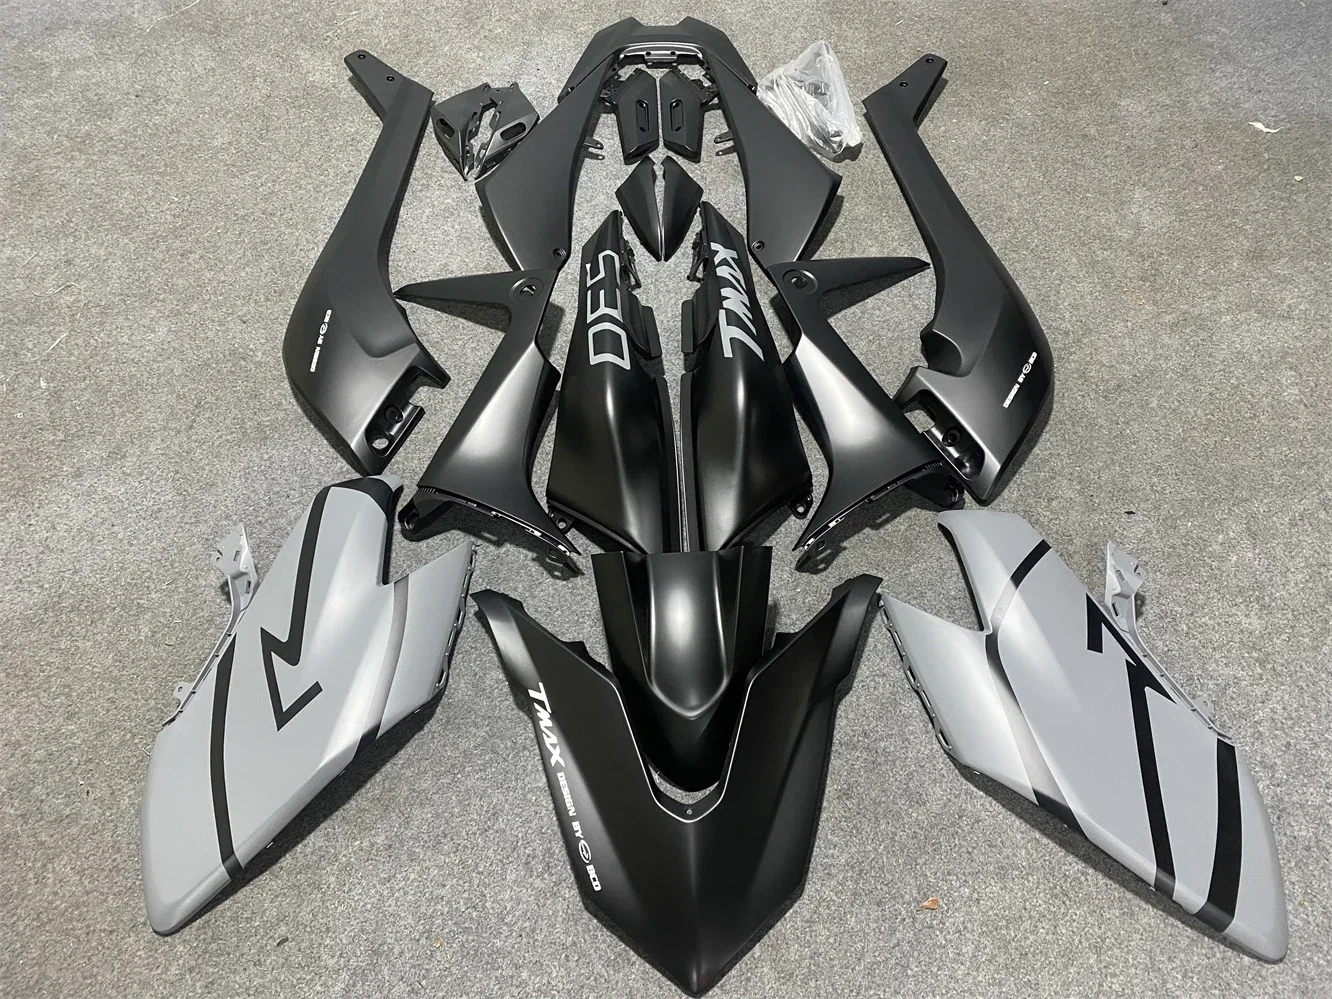 

For YAMAHA TMAX 530 TMAX-530 TMAX530 2017 2018 17 18 Injection Bodywork Matte Black New ABS Motorcycle Whole Fairings Kit Fit